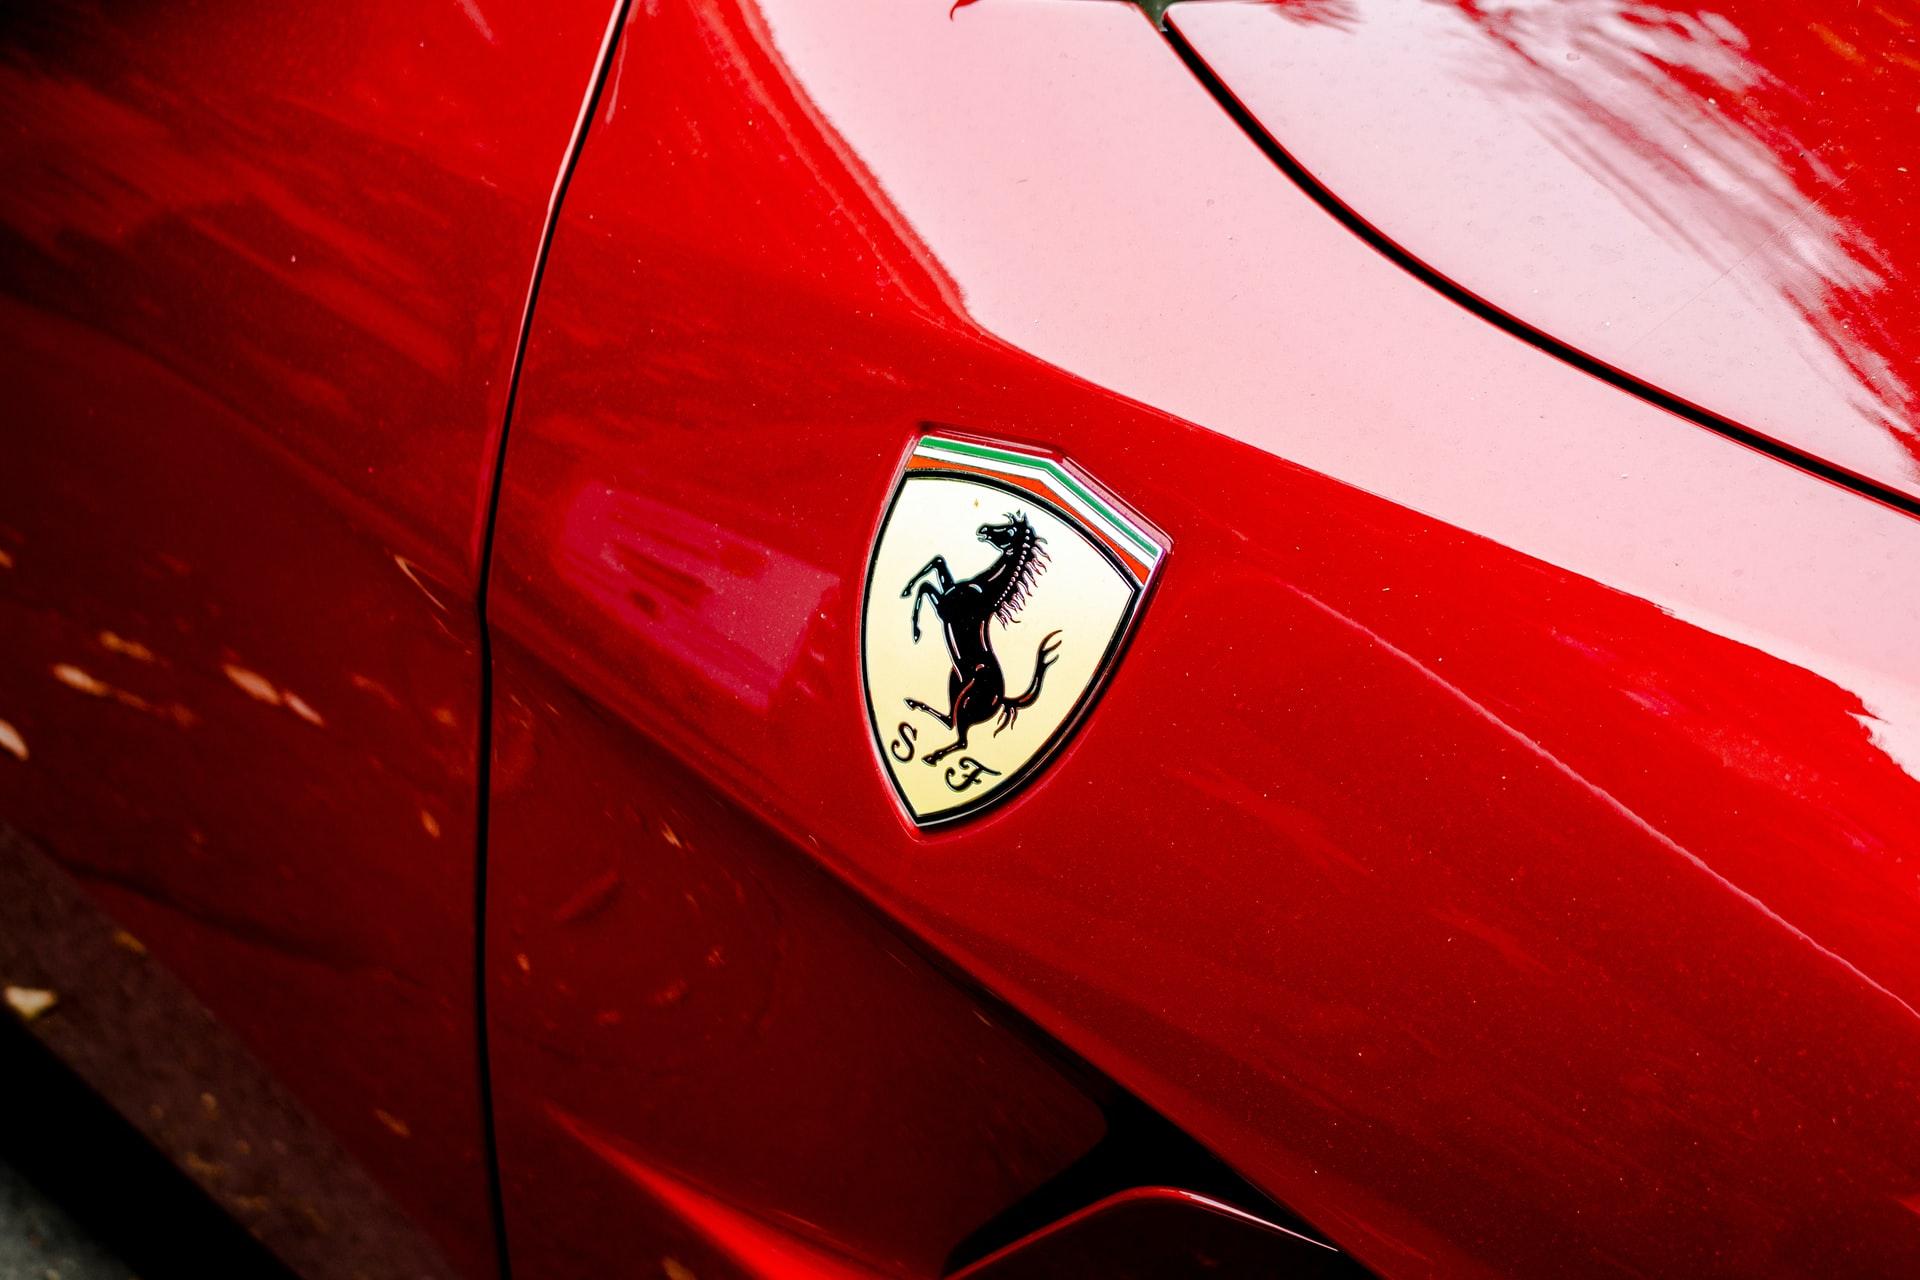 Though the “Bad Boys” series often featured Porsches, Michael Bay decided to use a Ferrari for a car chase in the second movie.